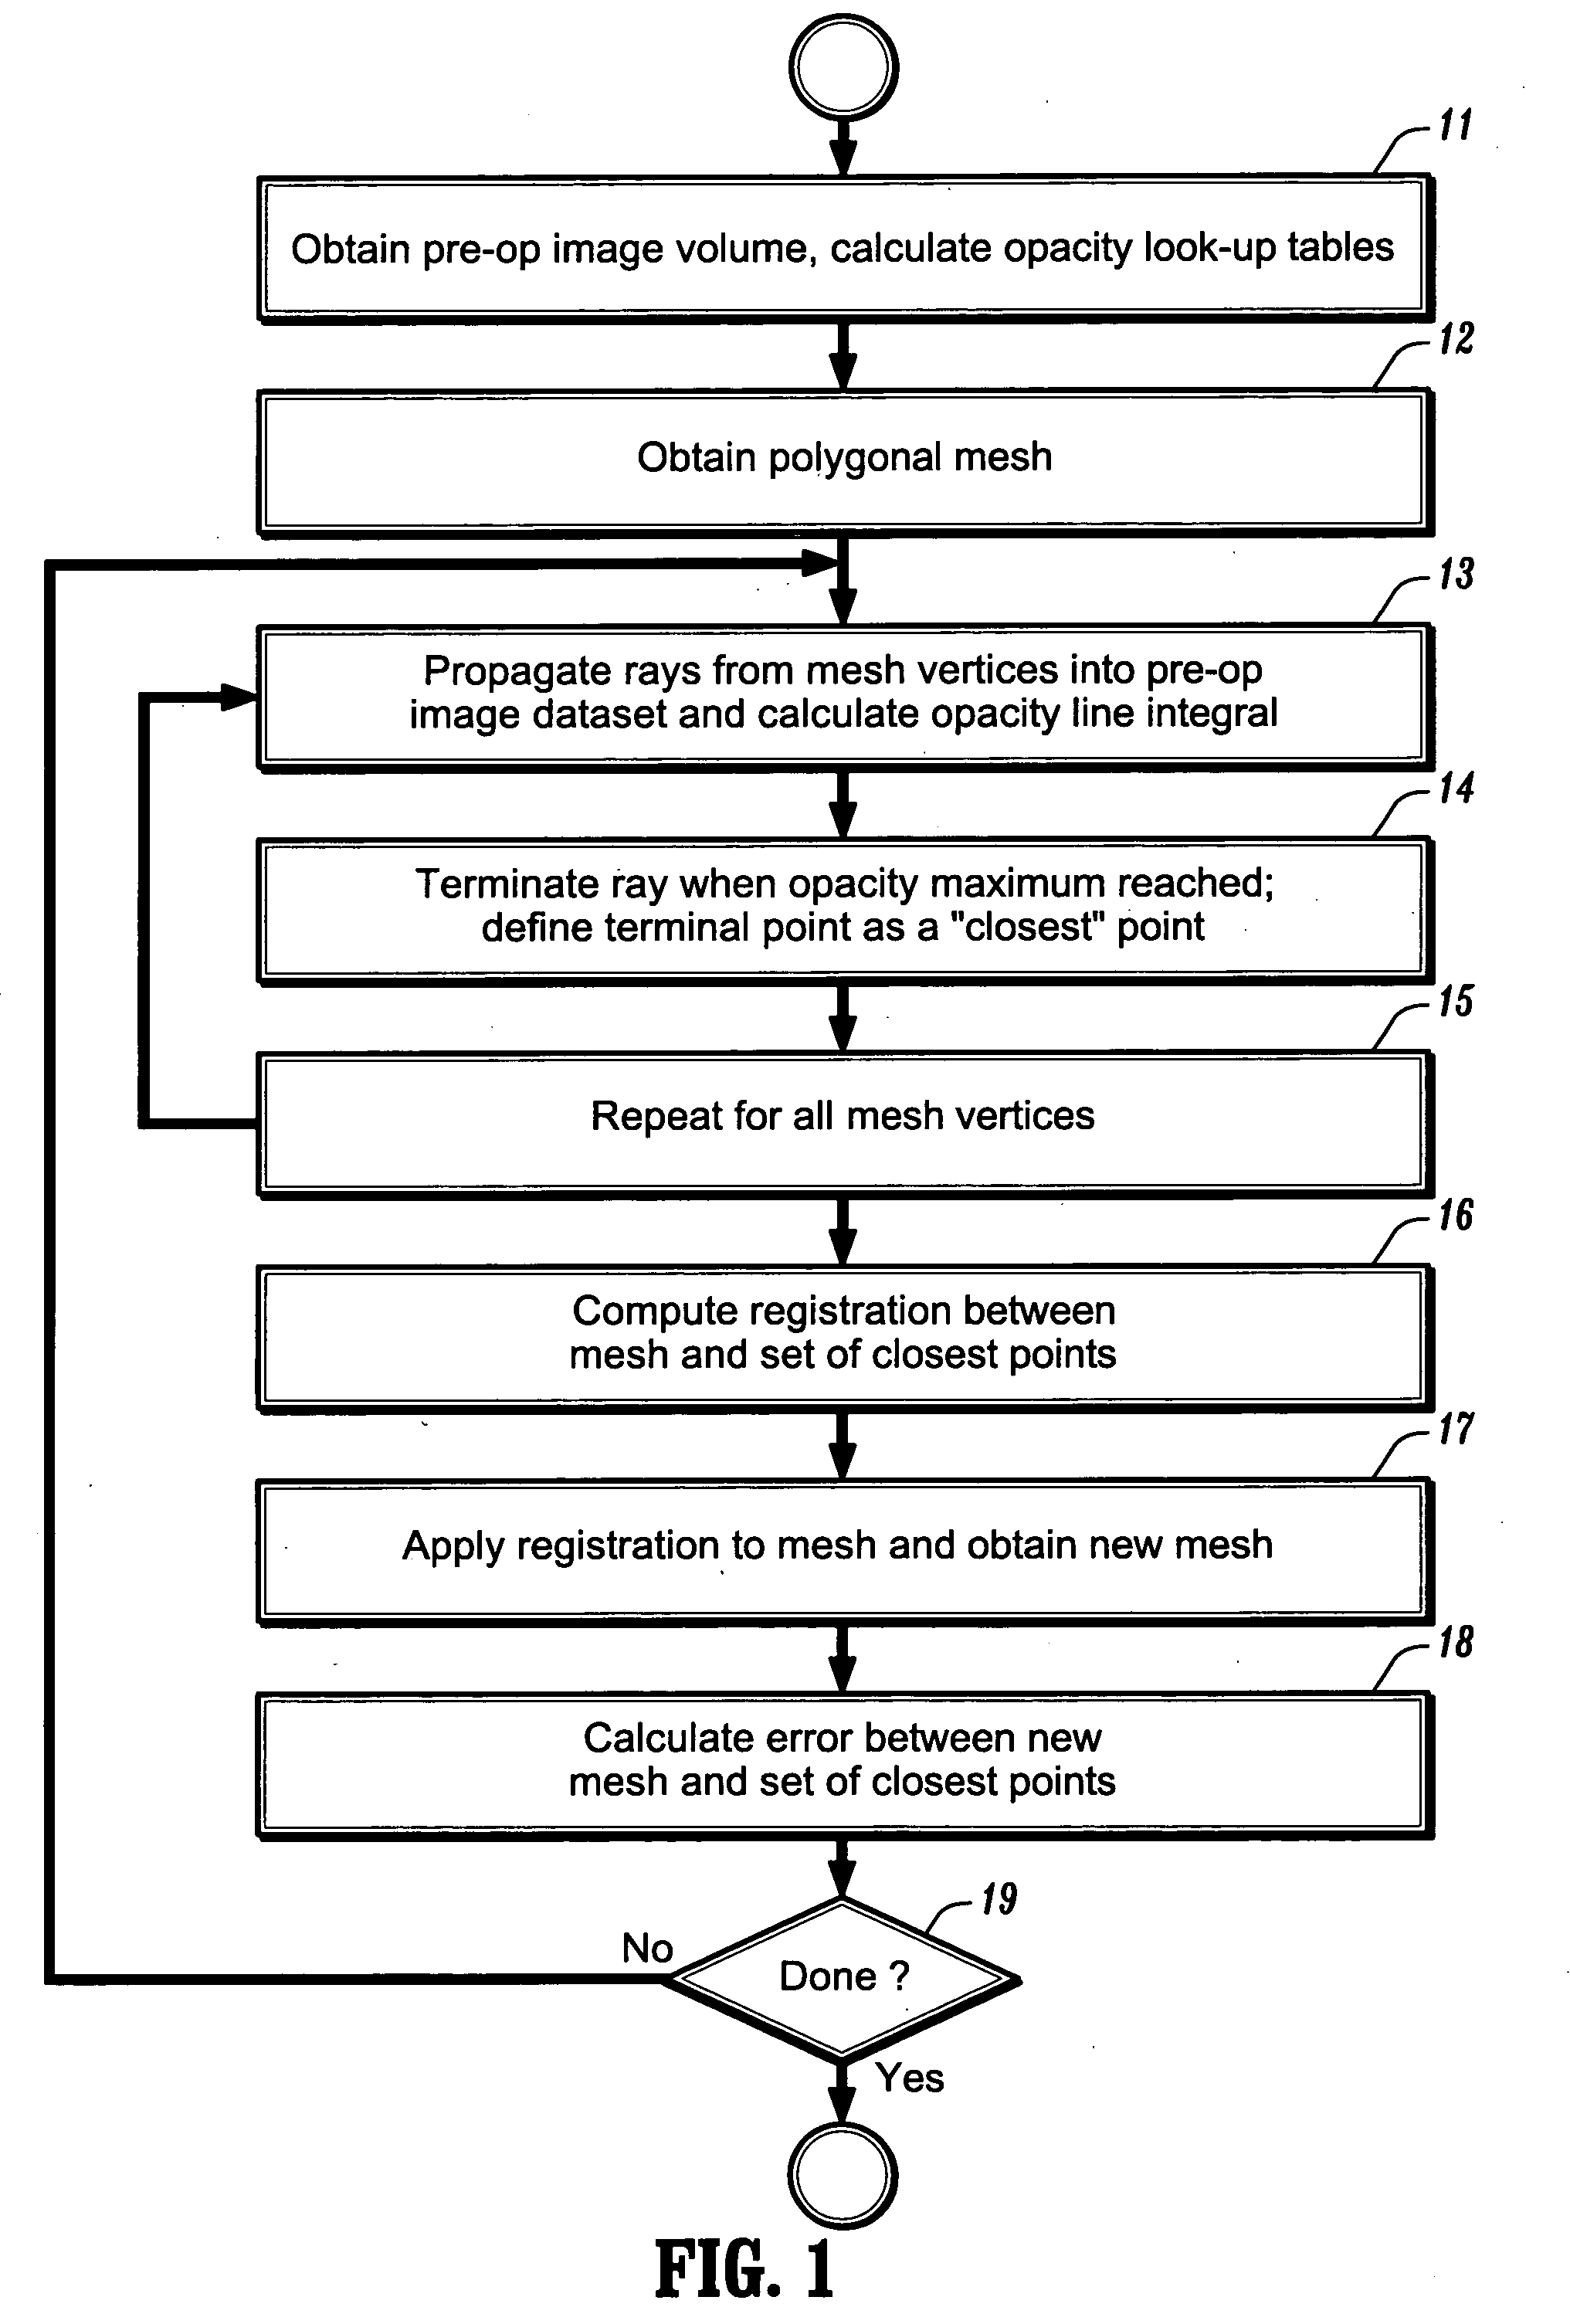 Method and system for mesh-to-image registration using raycasting